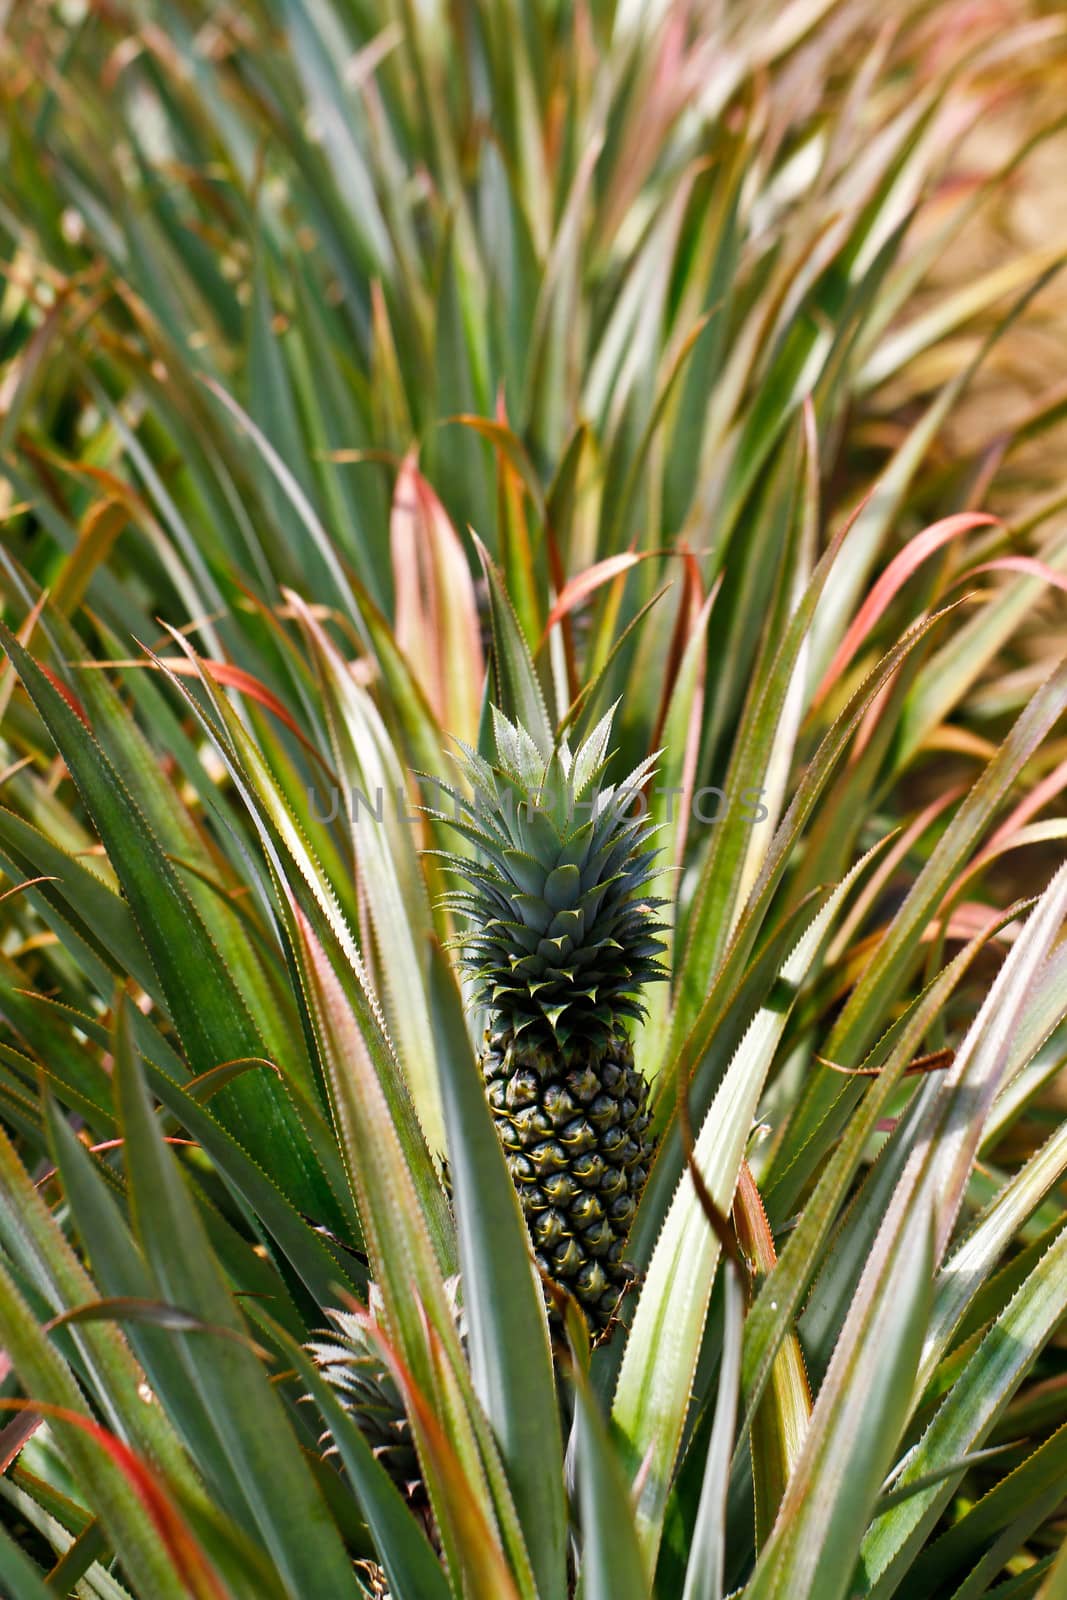 Pineapple Close-up 1 by azamshah72